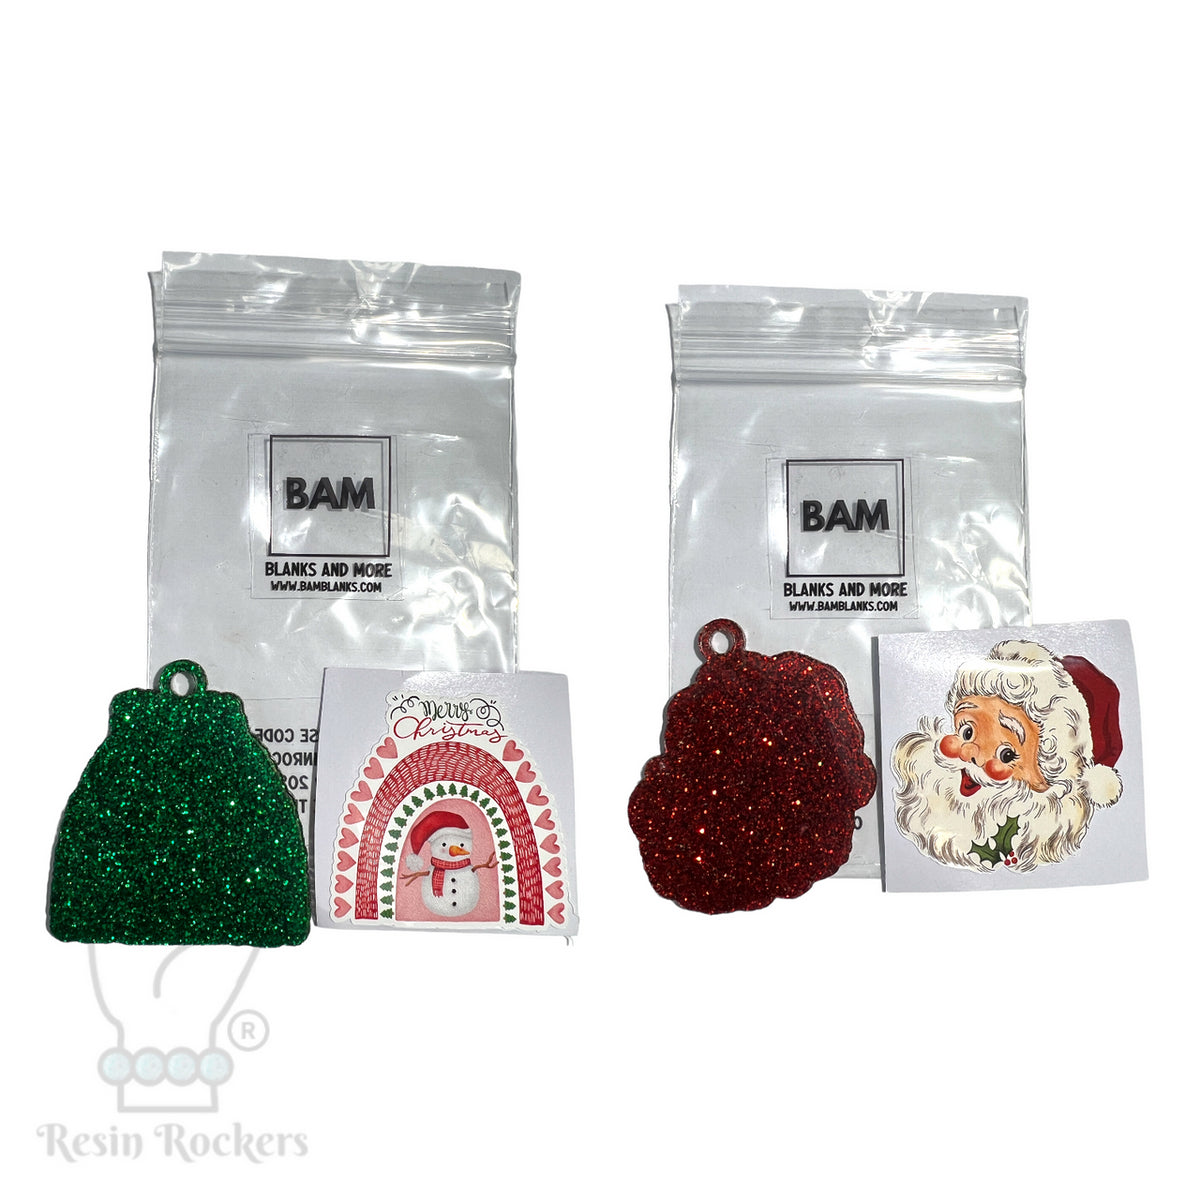 BAM BLANKS Holiday Decal and Glitter Acrylic Shape Sets